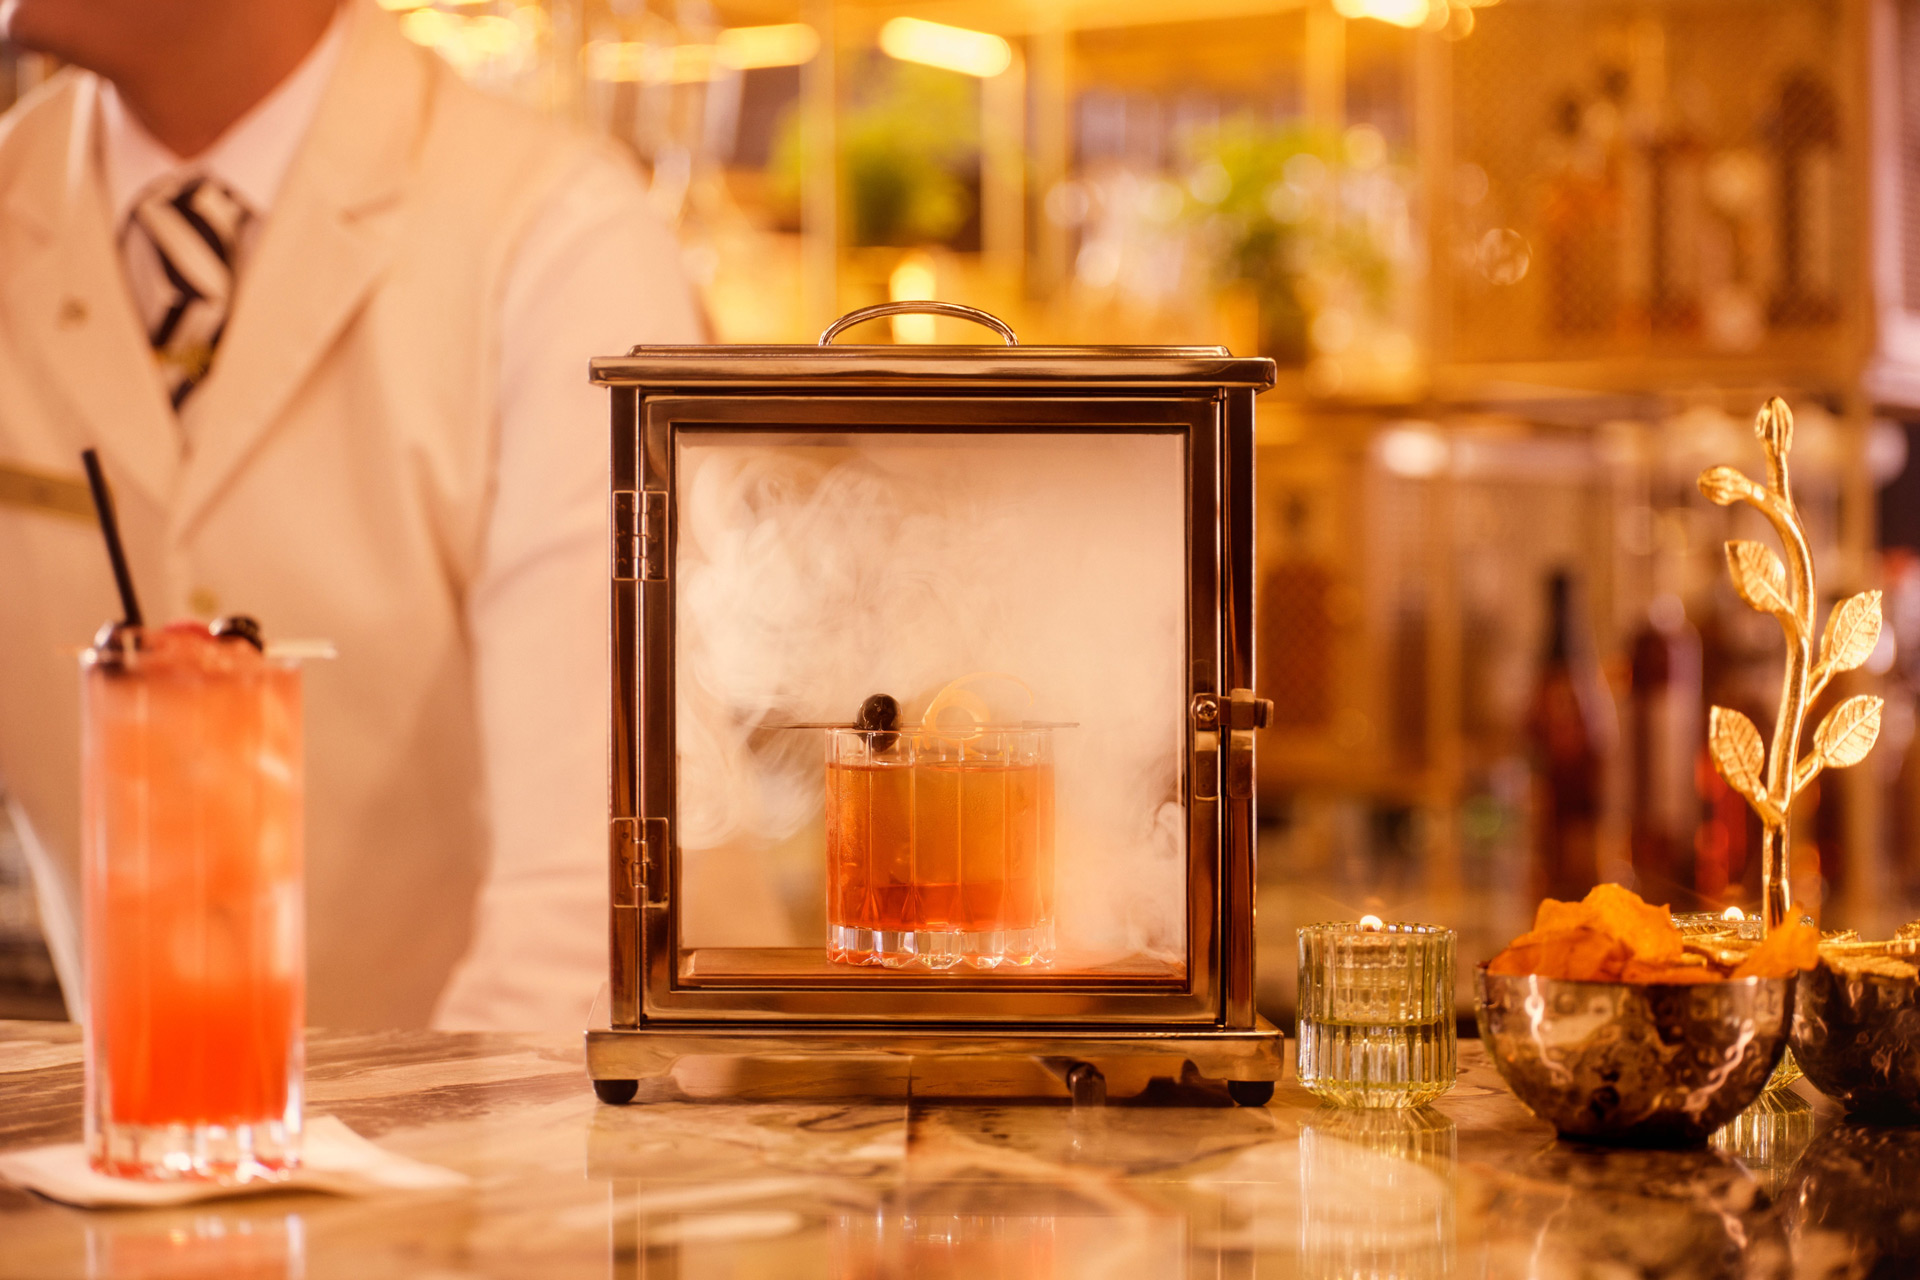 Click here to open the gallery overlay for the image: decorative image of cocktails being served